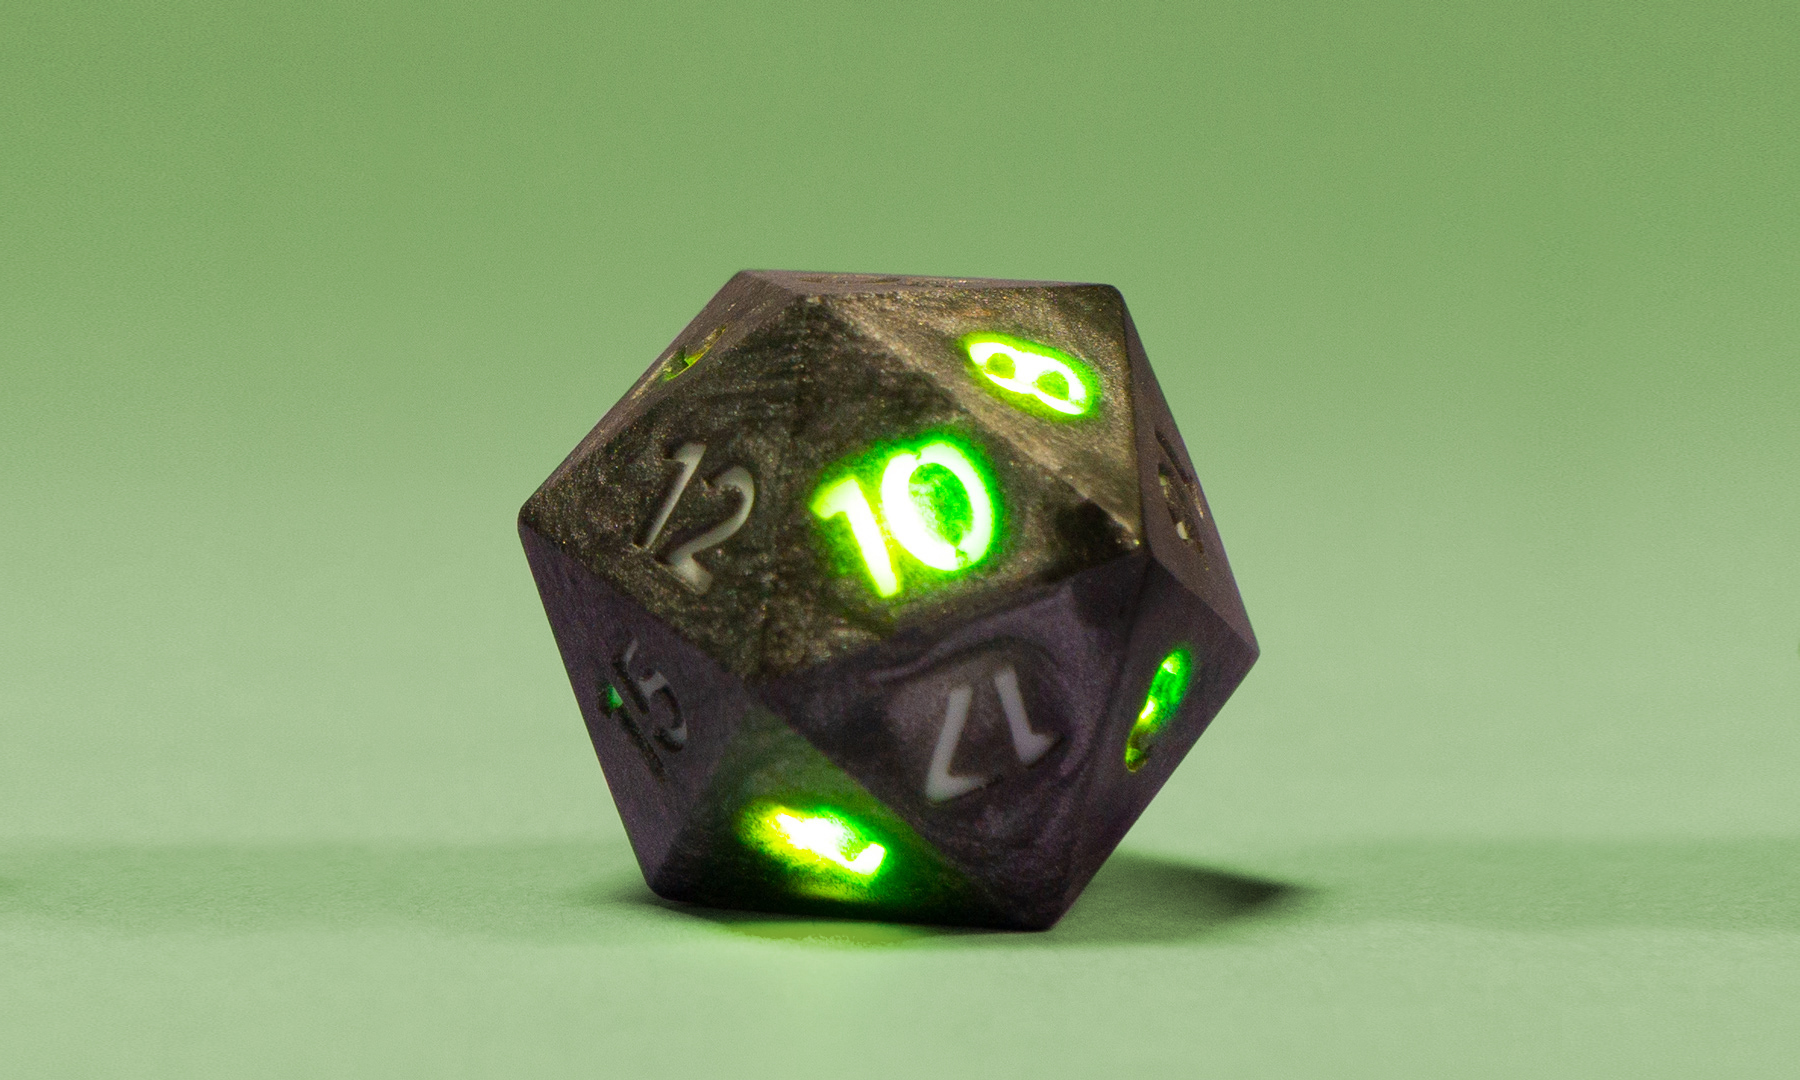 D20 lit with green numbers.